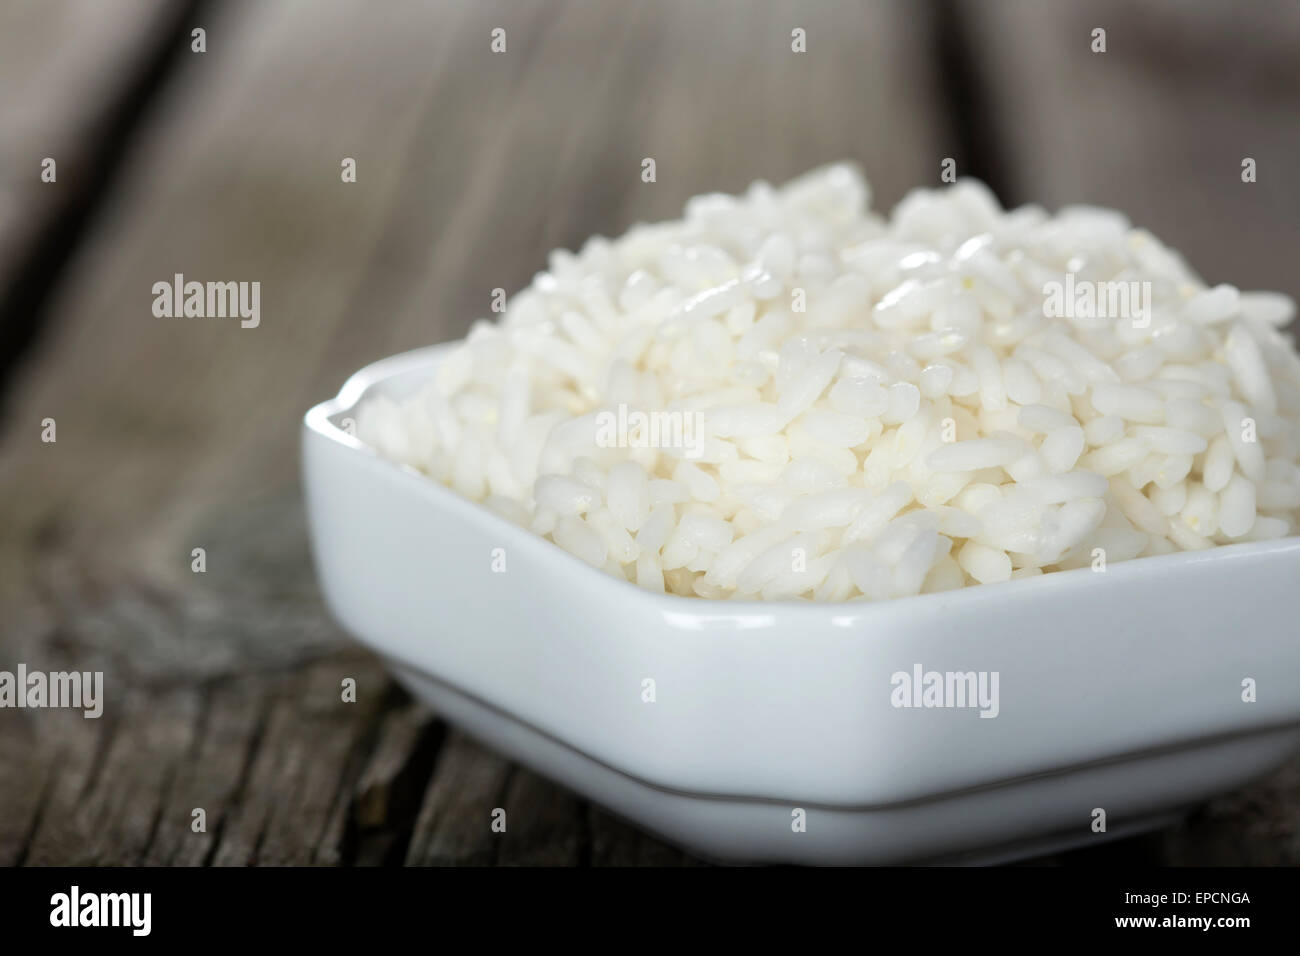 Bowl full of rice over wooden background Stock Photo